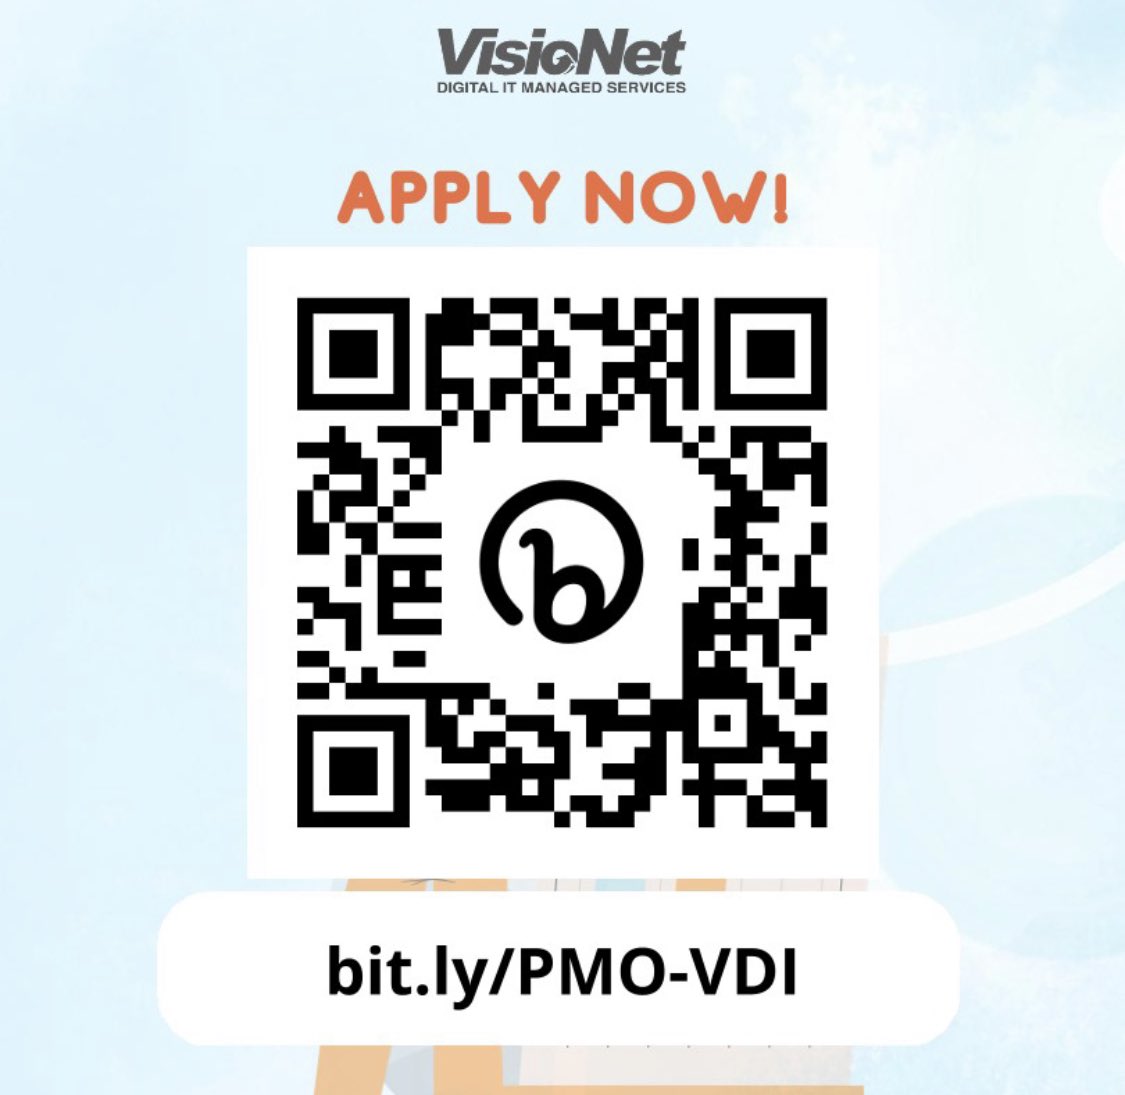 #LokerPam - VisioNet - Project Manager - bit.ly/PMO-VDI